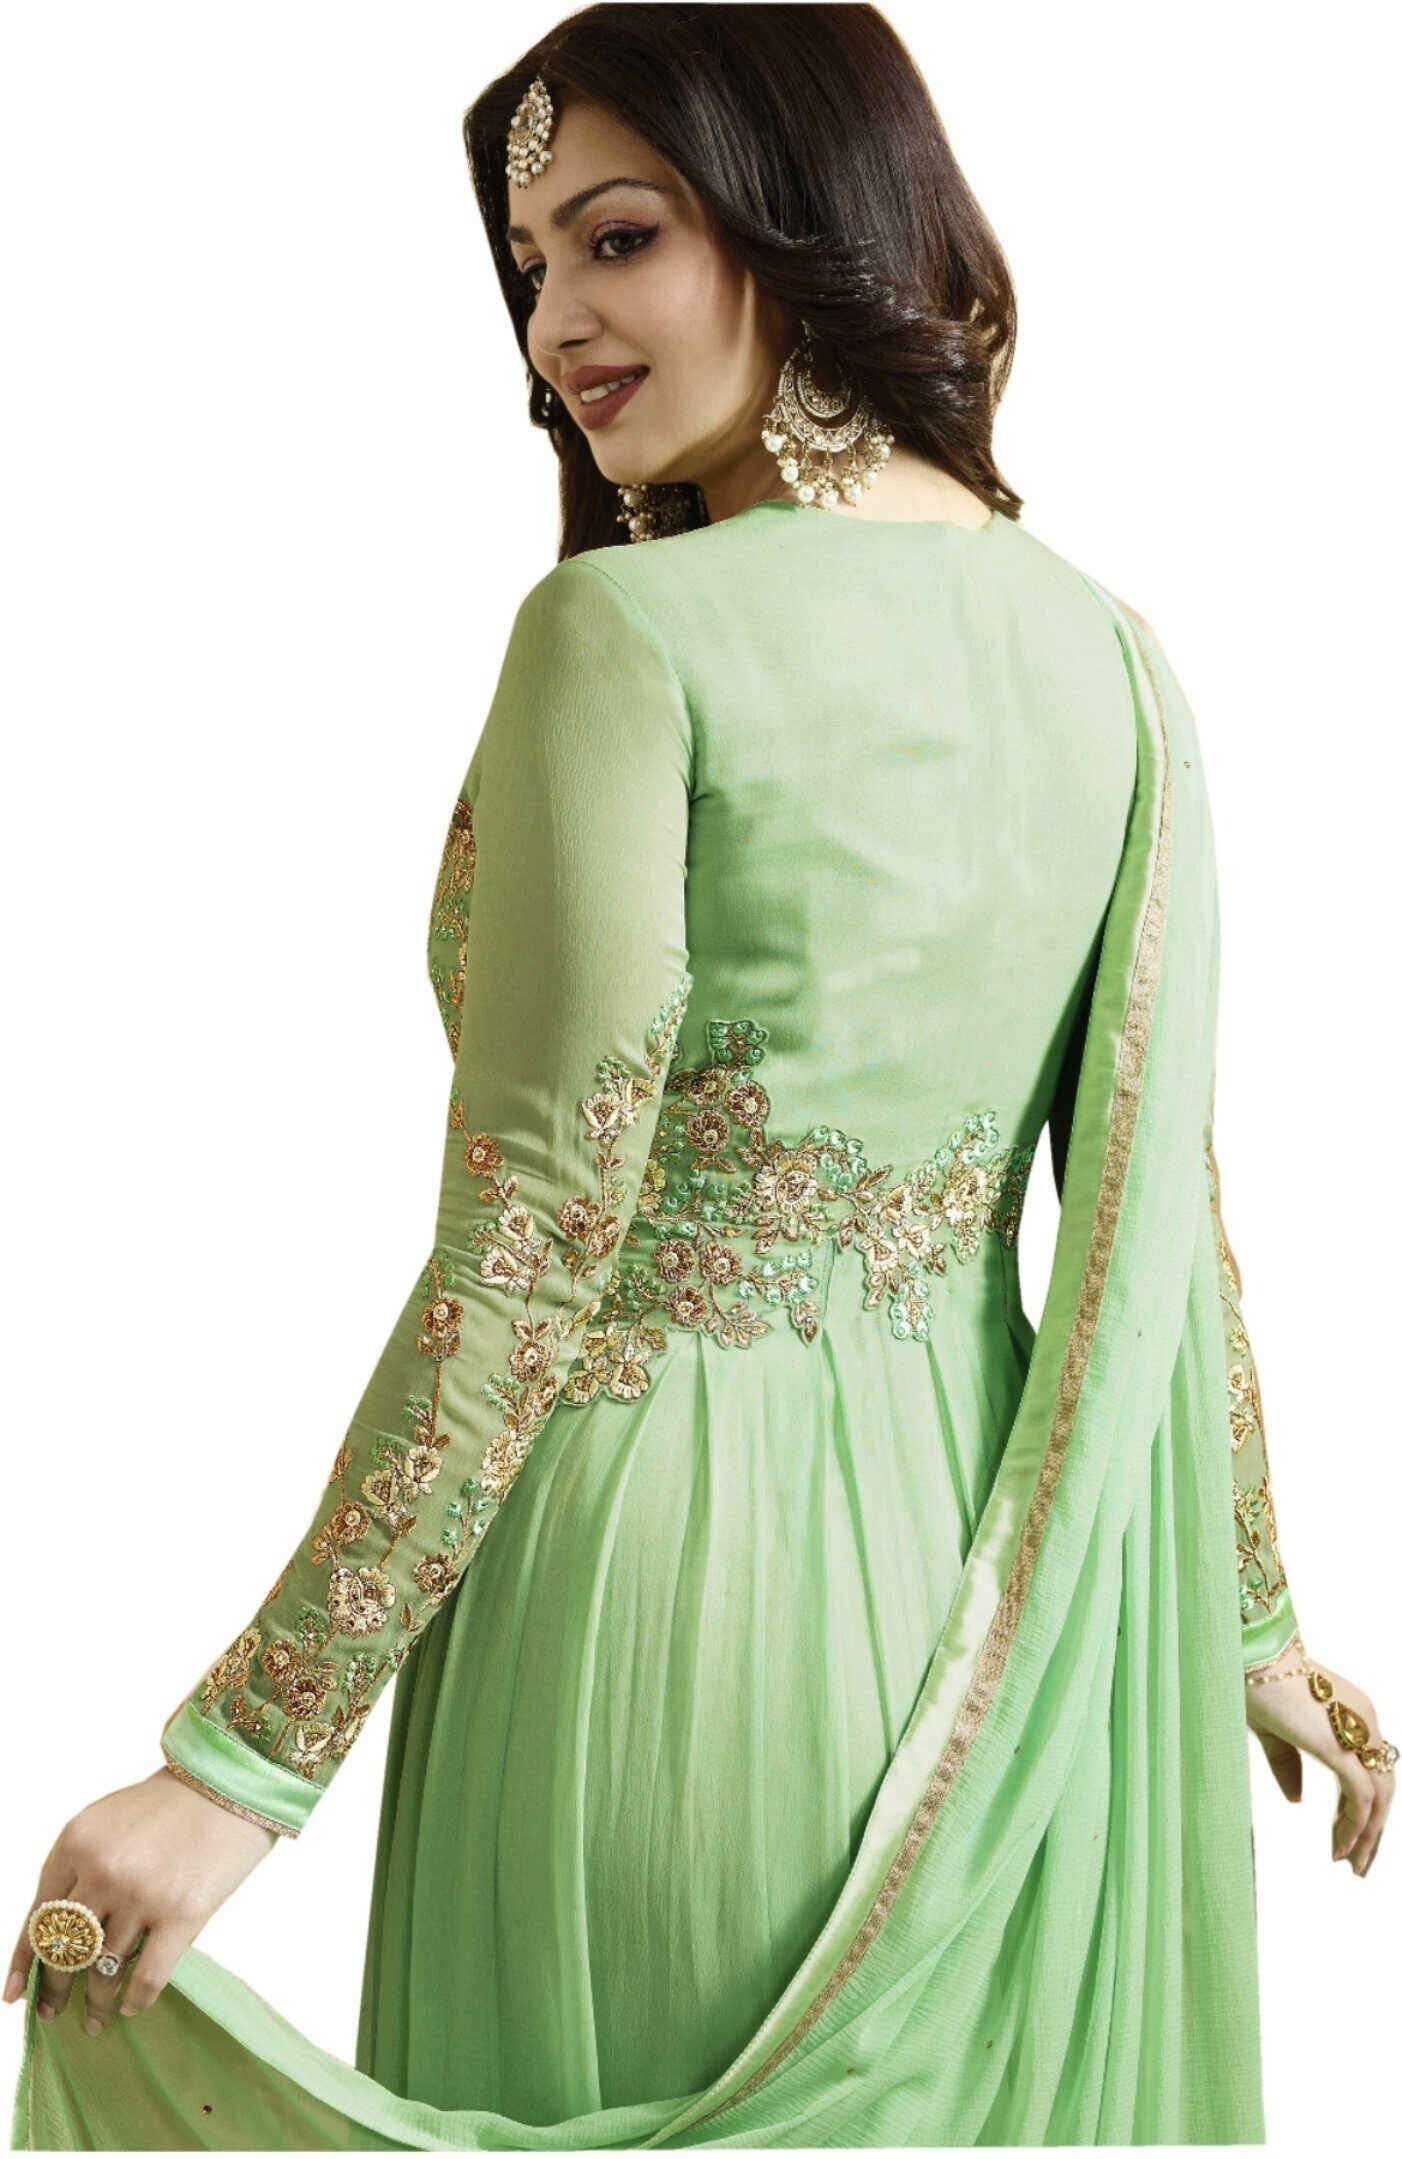 Sea Green with Golden Floral Embroidery Anarkali Suit